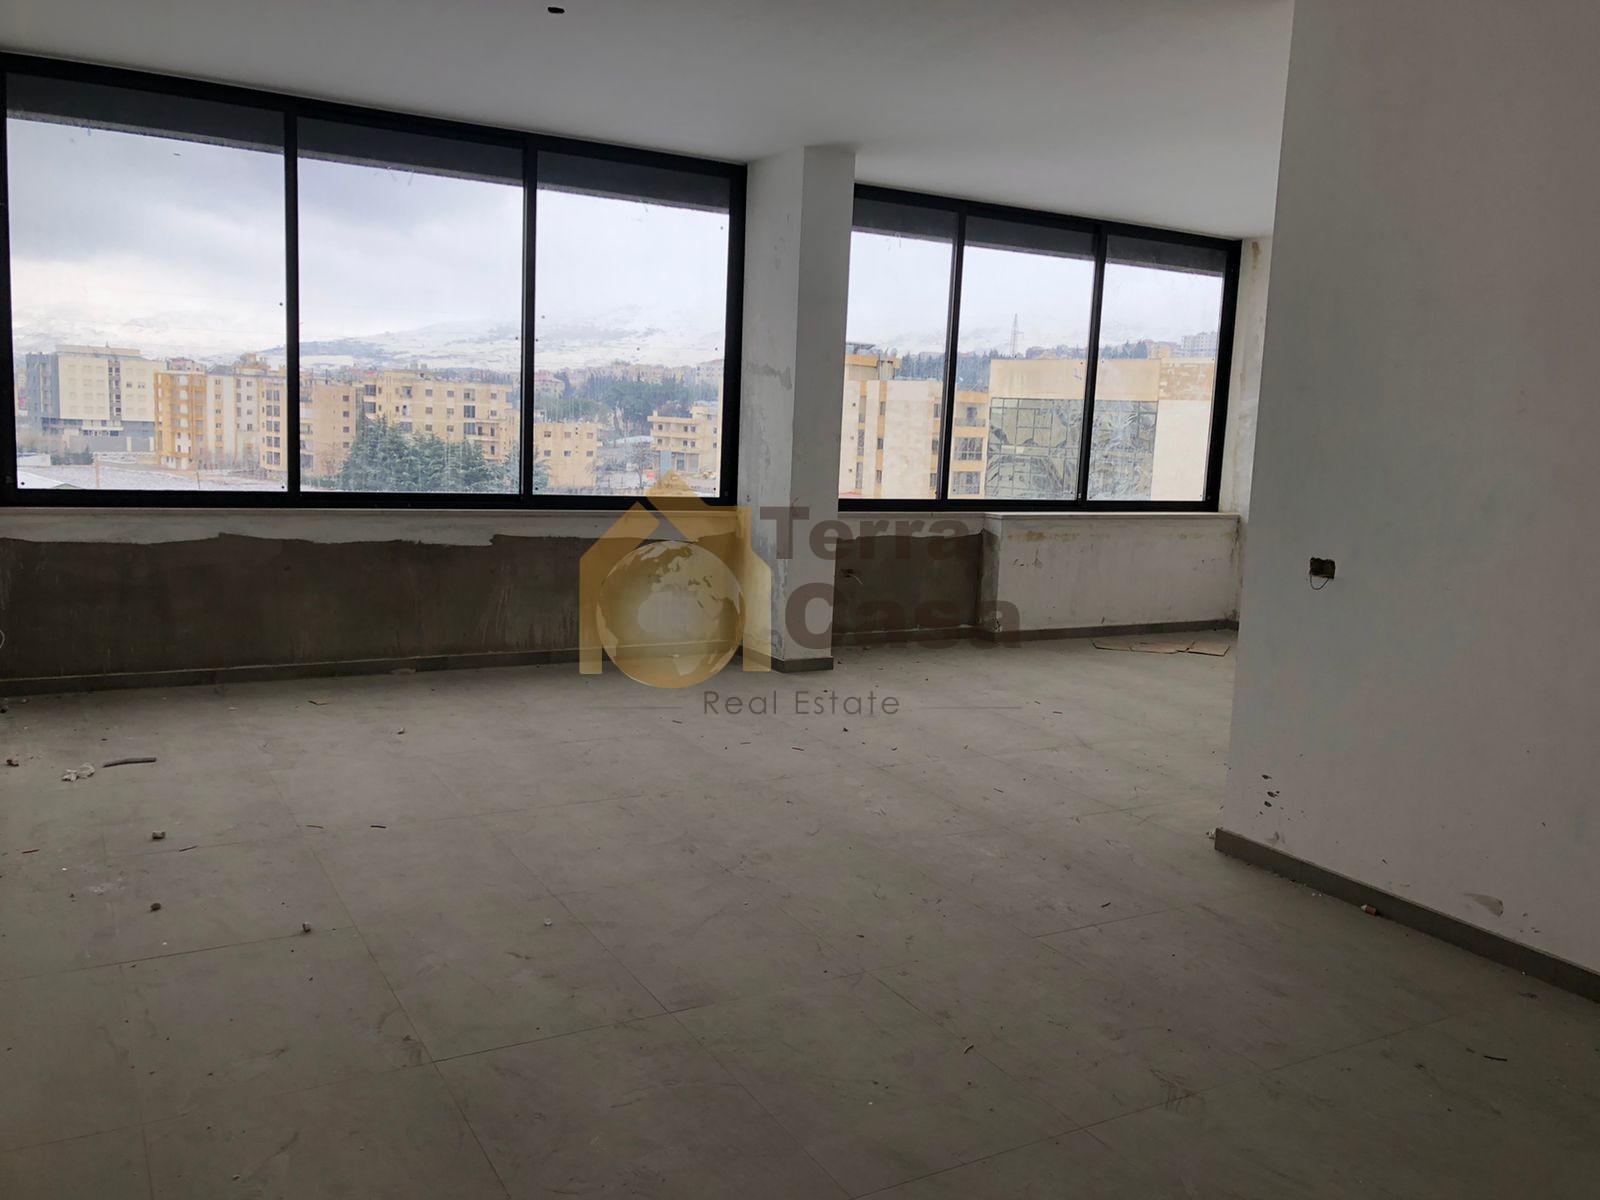 Office for sale in Zahle brand new in haouch el omara prime location for sale .